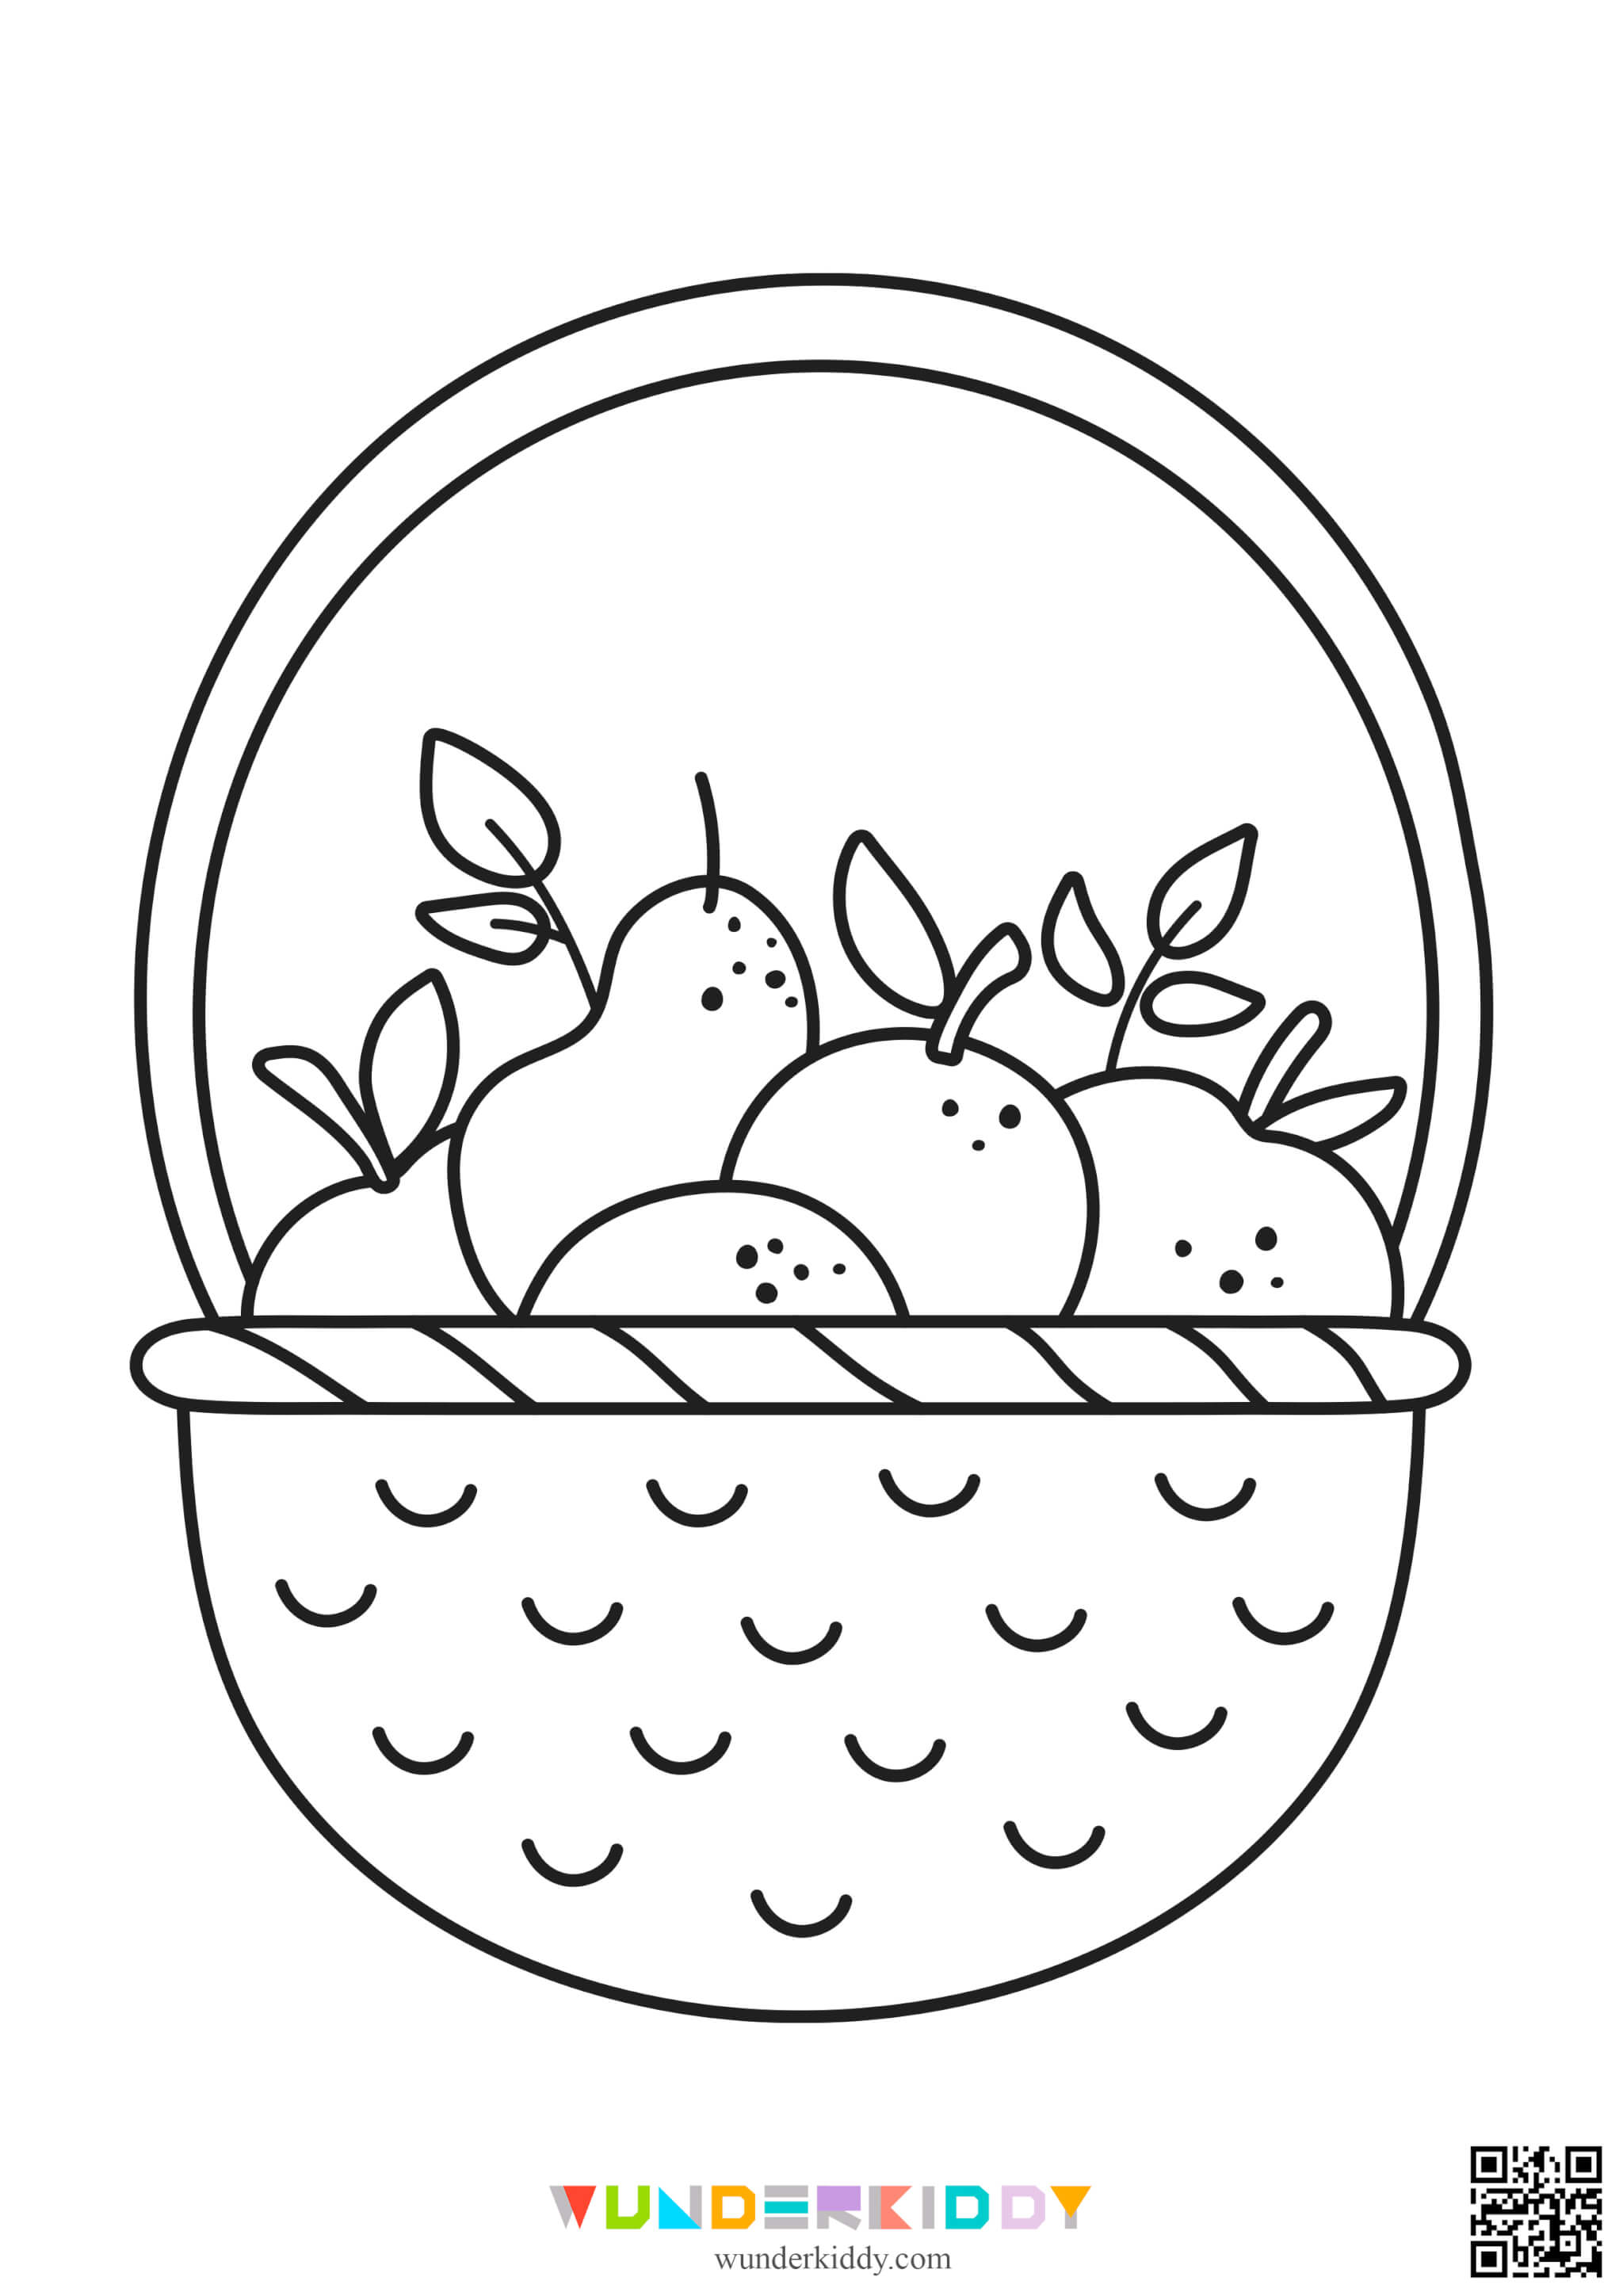 Fall Coloring Pages - Image 3